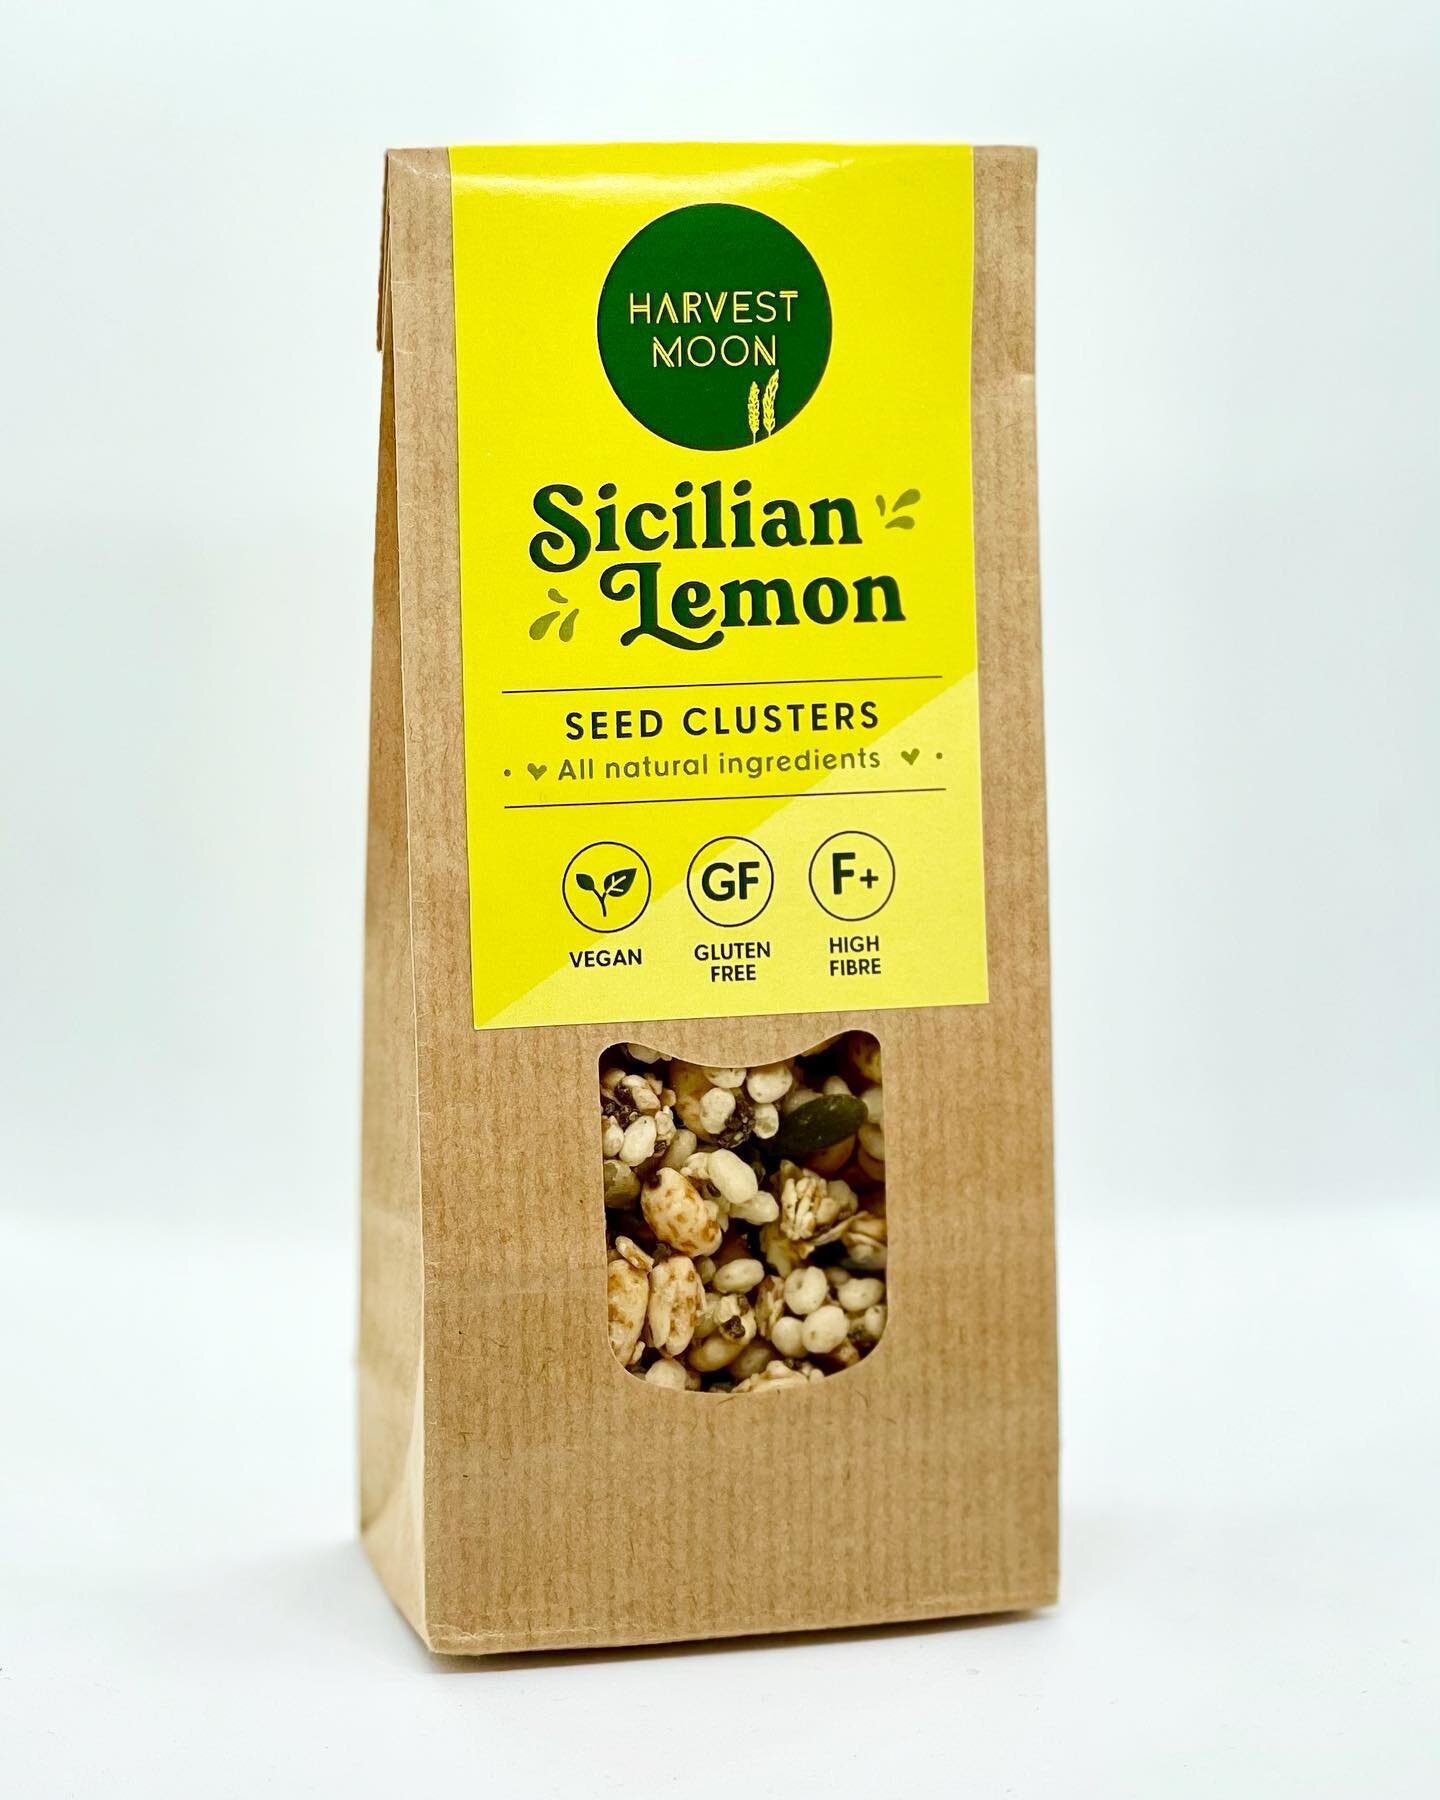 🍋💚 Zesty and crunchy, our #SicilianLemon Seed Clusters are perfect for a snacking on-the-go 👌 #harvestmoonsnacks 

Available to order now via the link in our bio 🙌 

#madeinyork #vegan #highfibre #clusters #snacktime #glutenfree #healthylifestyle